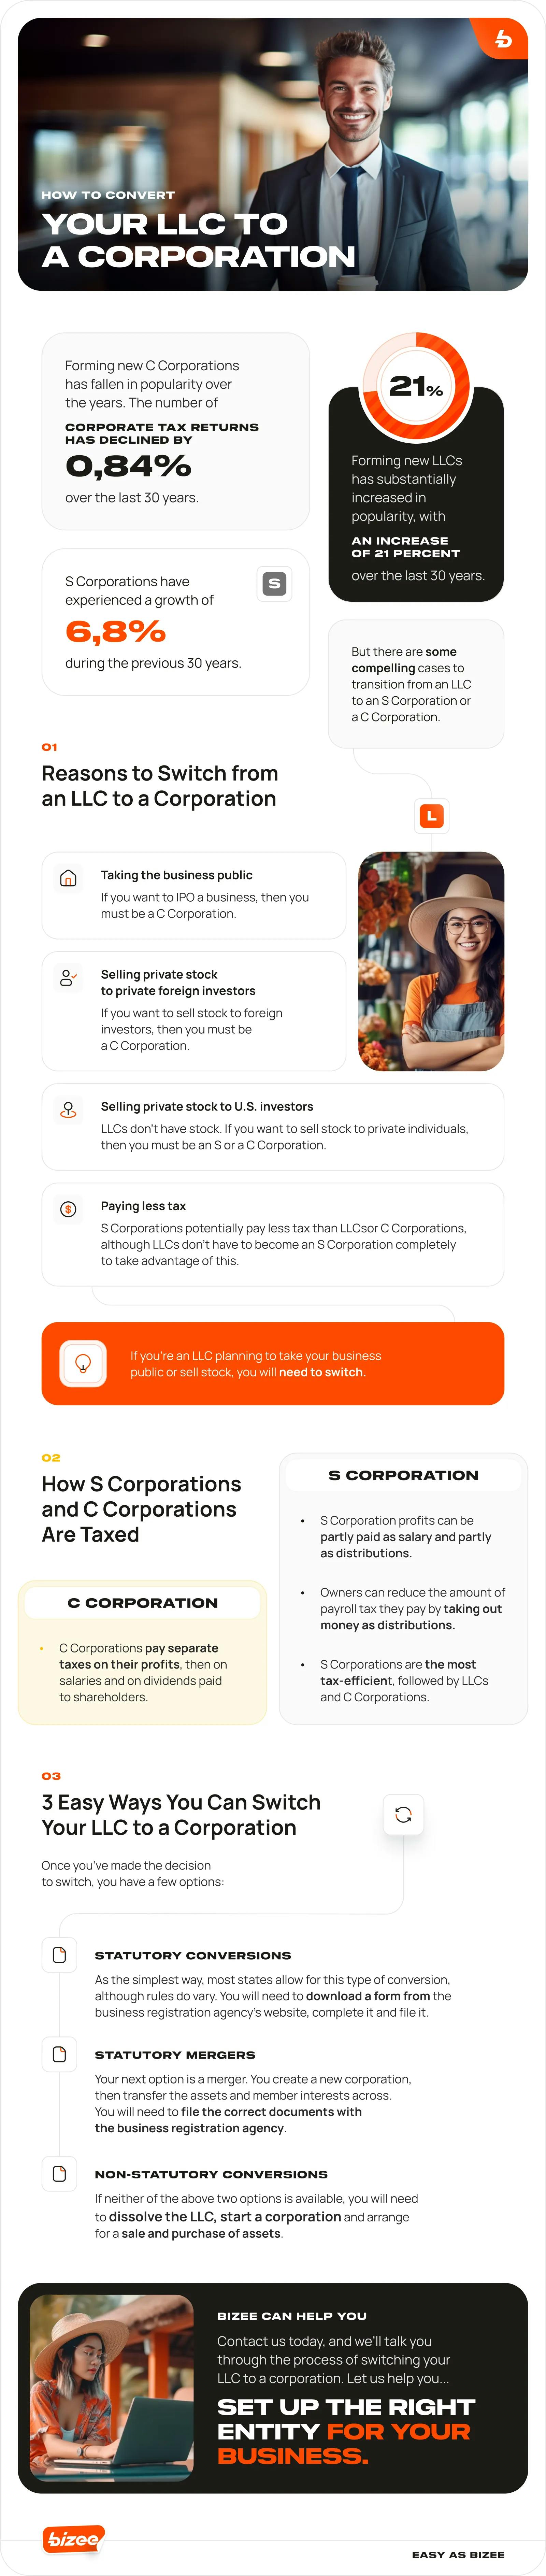 How to Convert Your LLC to a Corporation